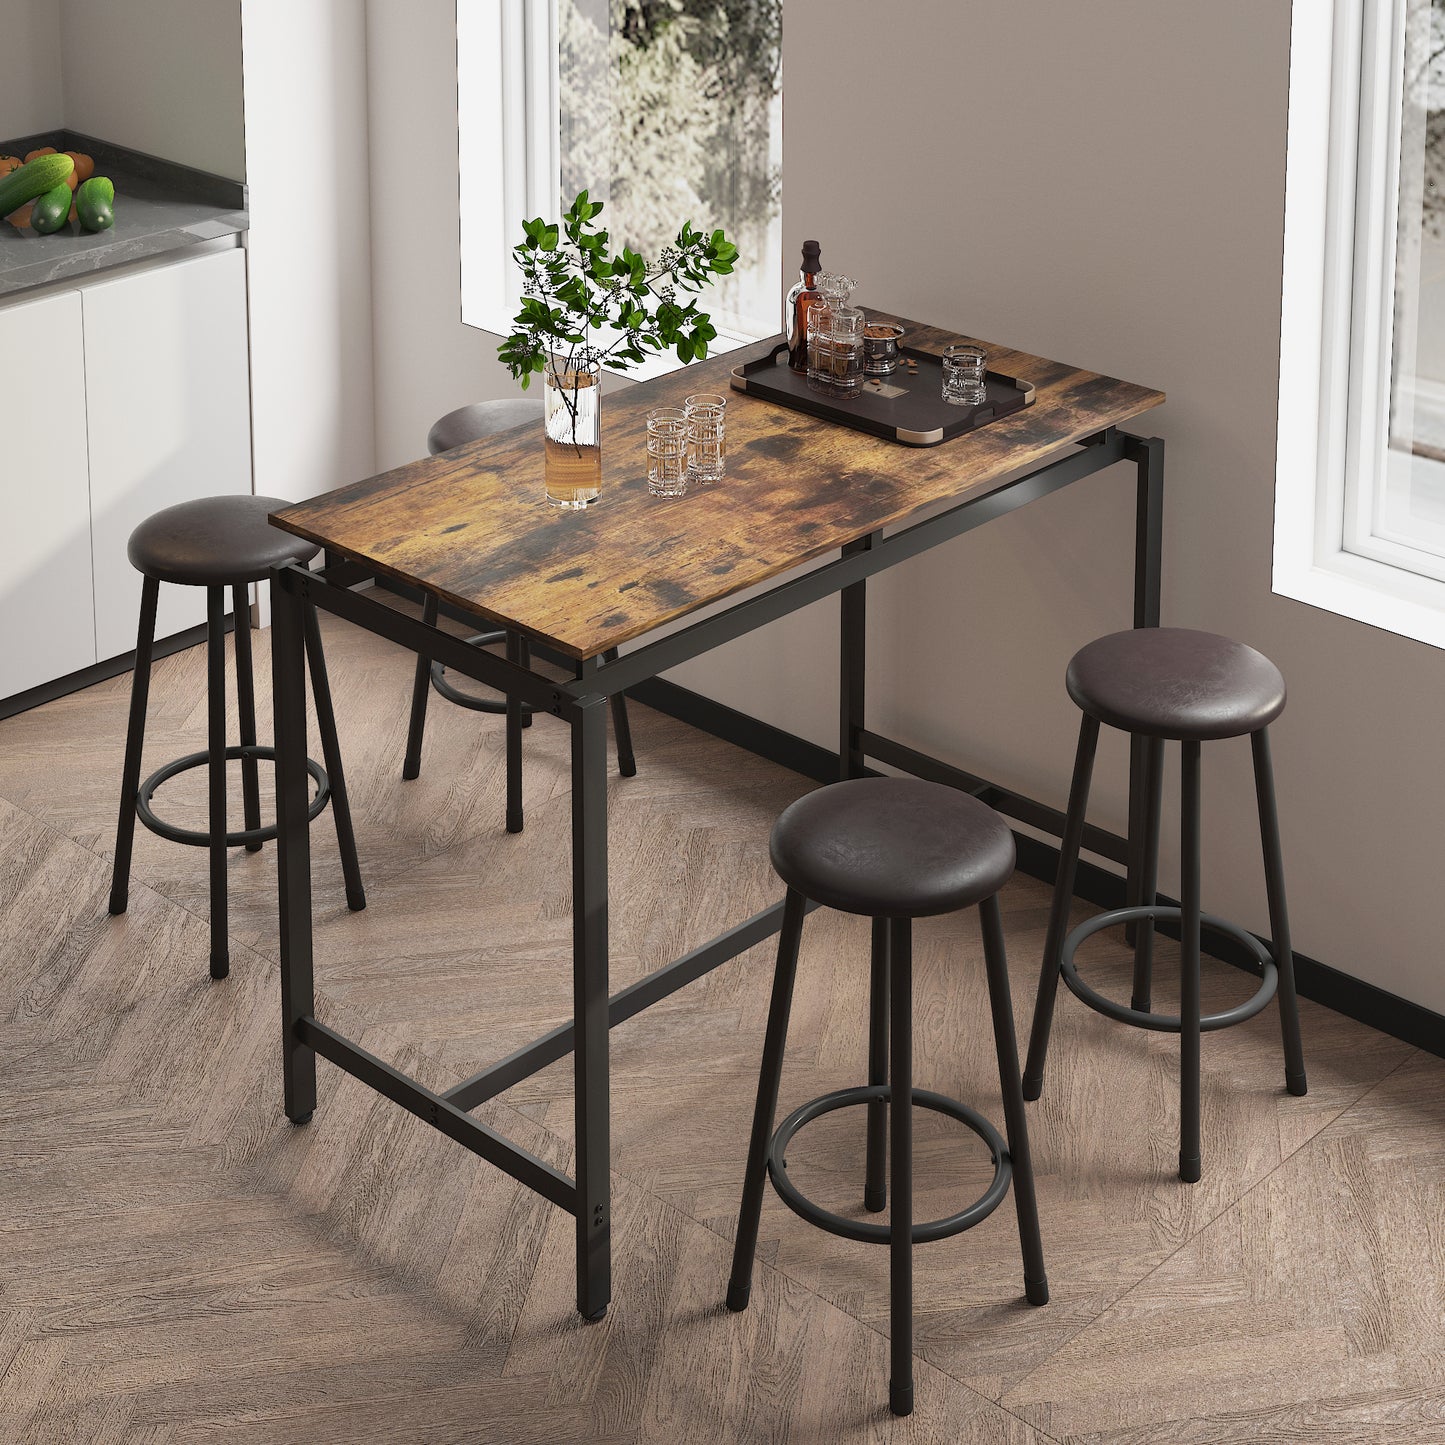 SYNGAR 5 Piece Dining Table Set, Modern Pub Table Set with 4 Stools, Counter Height Bar Table Set, 4-Person Home Dining Table and Stools Set, Kitchen Table Set for Breakfast, Rustic Brown, D6632